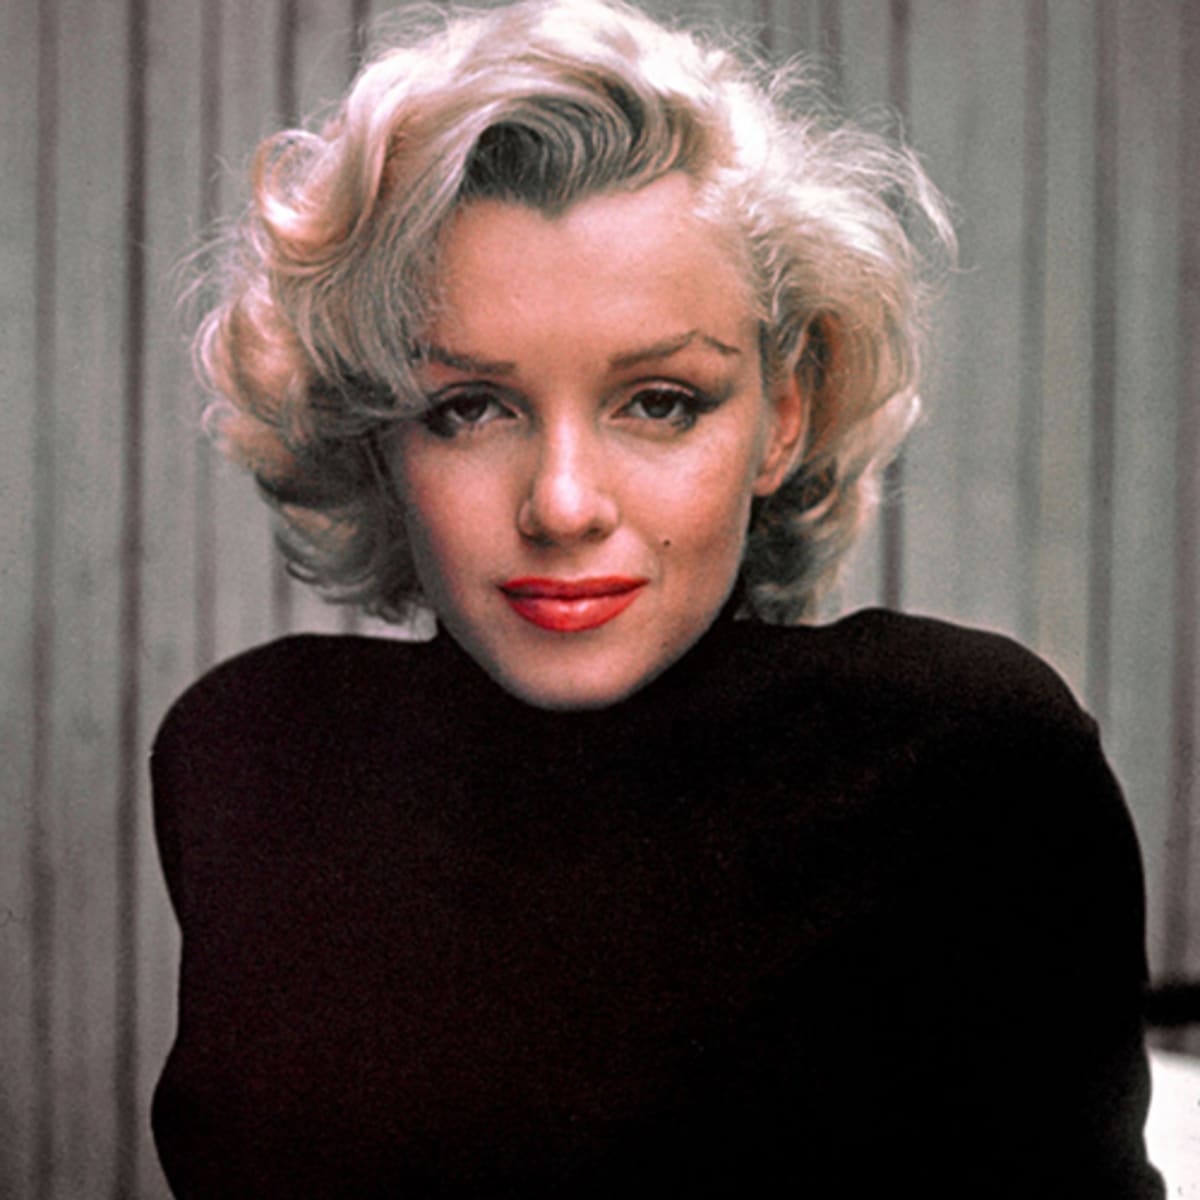 marilyn monroe photo alfred eisenstaedt pix inc the life picture collection getty images 53376357 cropped